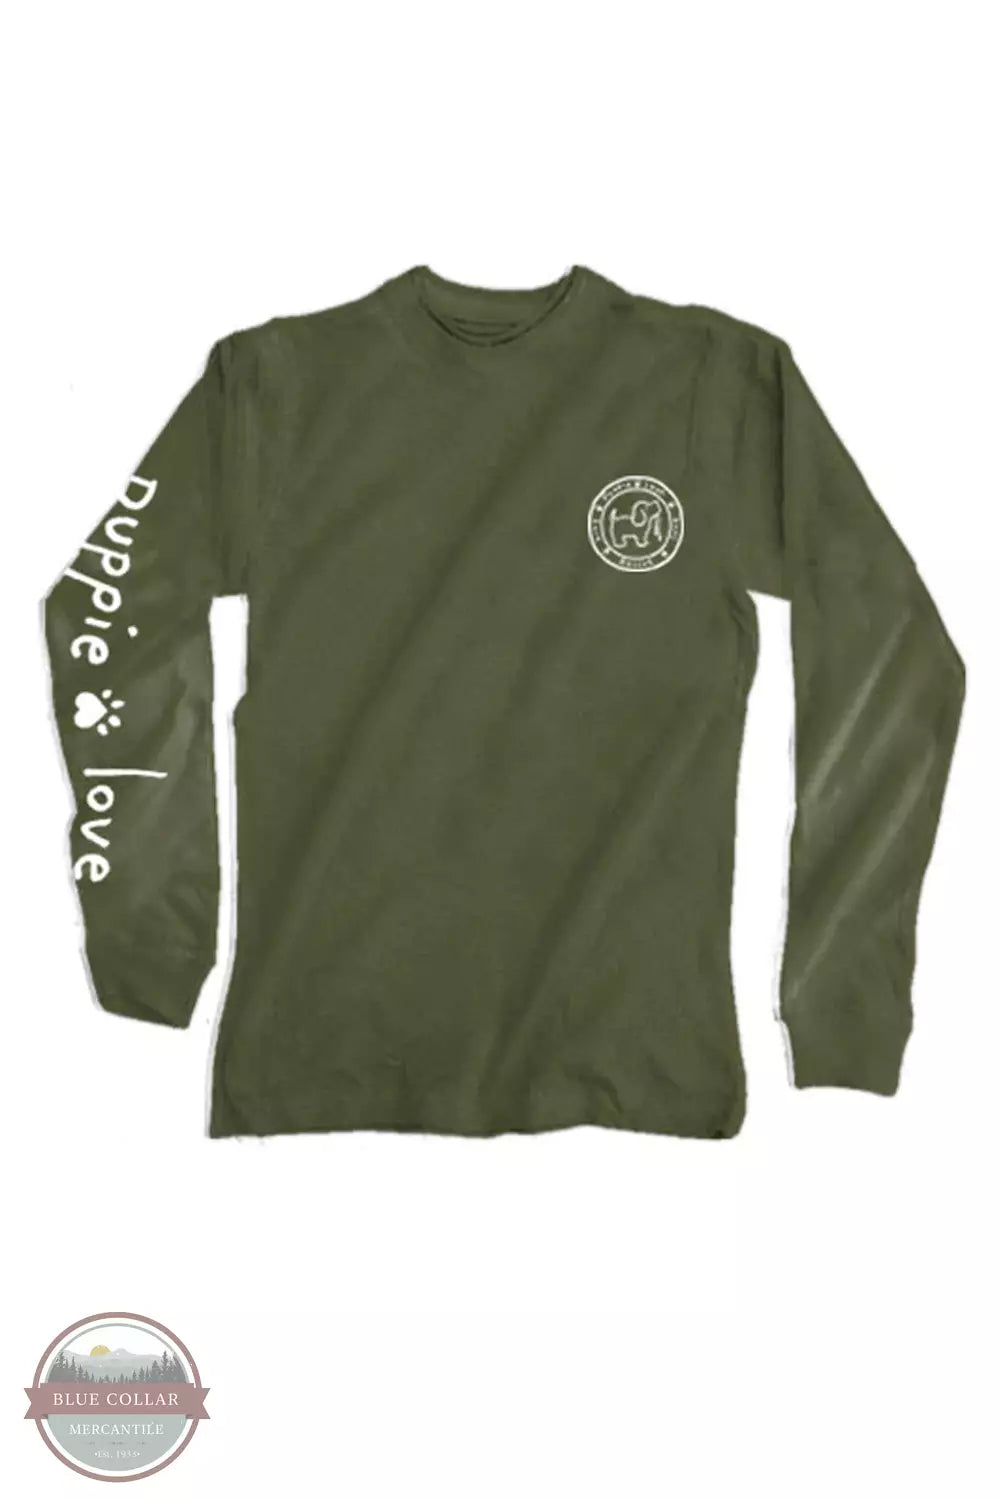 Puppie Love SPL961 Military Working Pup Long Sleeve T-Shirt in Military Green Front View